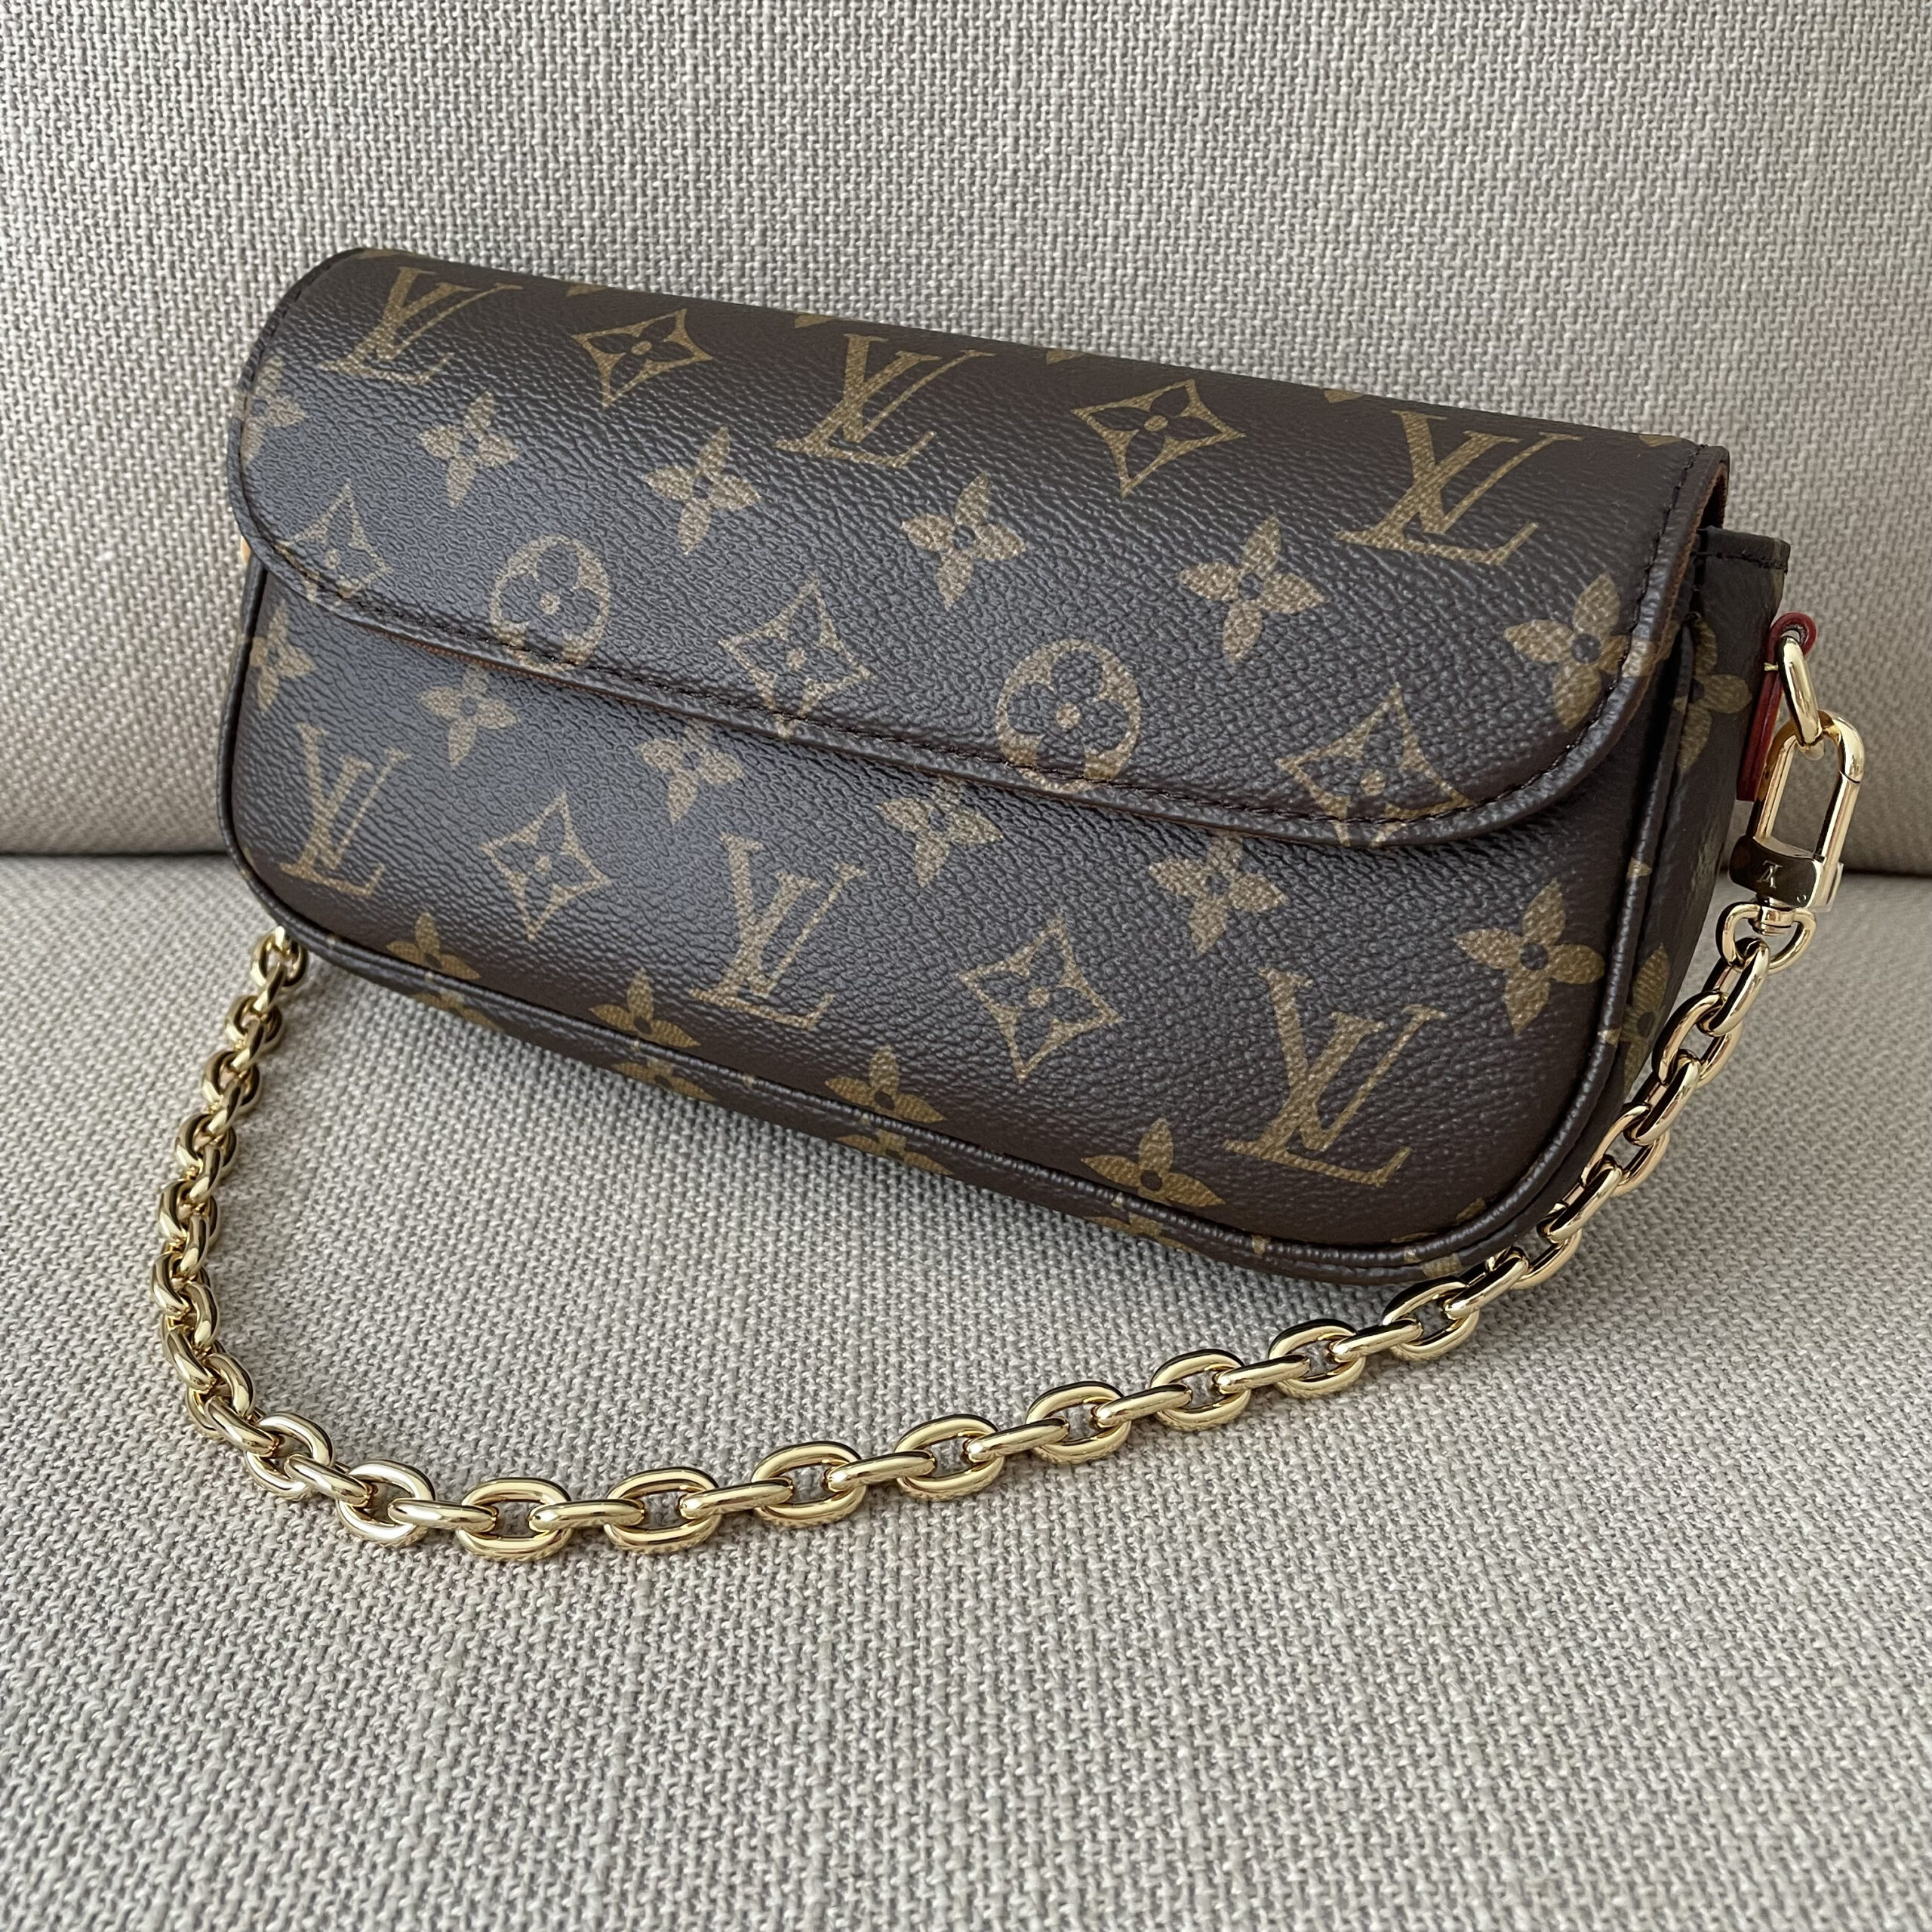 Lv Wallet On chain Ivy in 2023  Louis bag, Lv wallet on chain